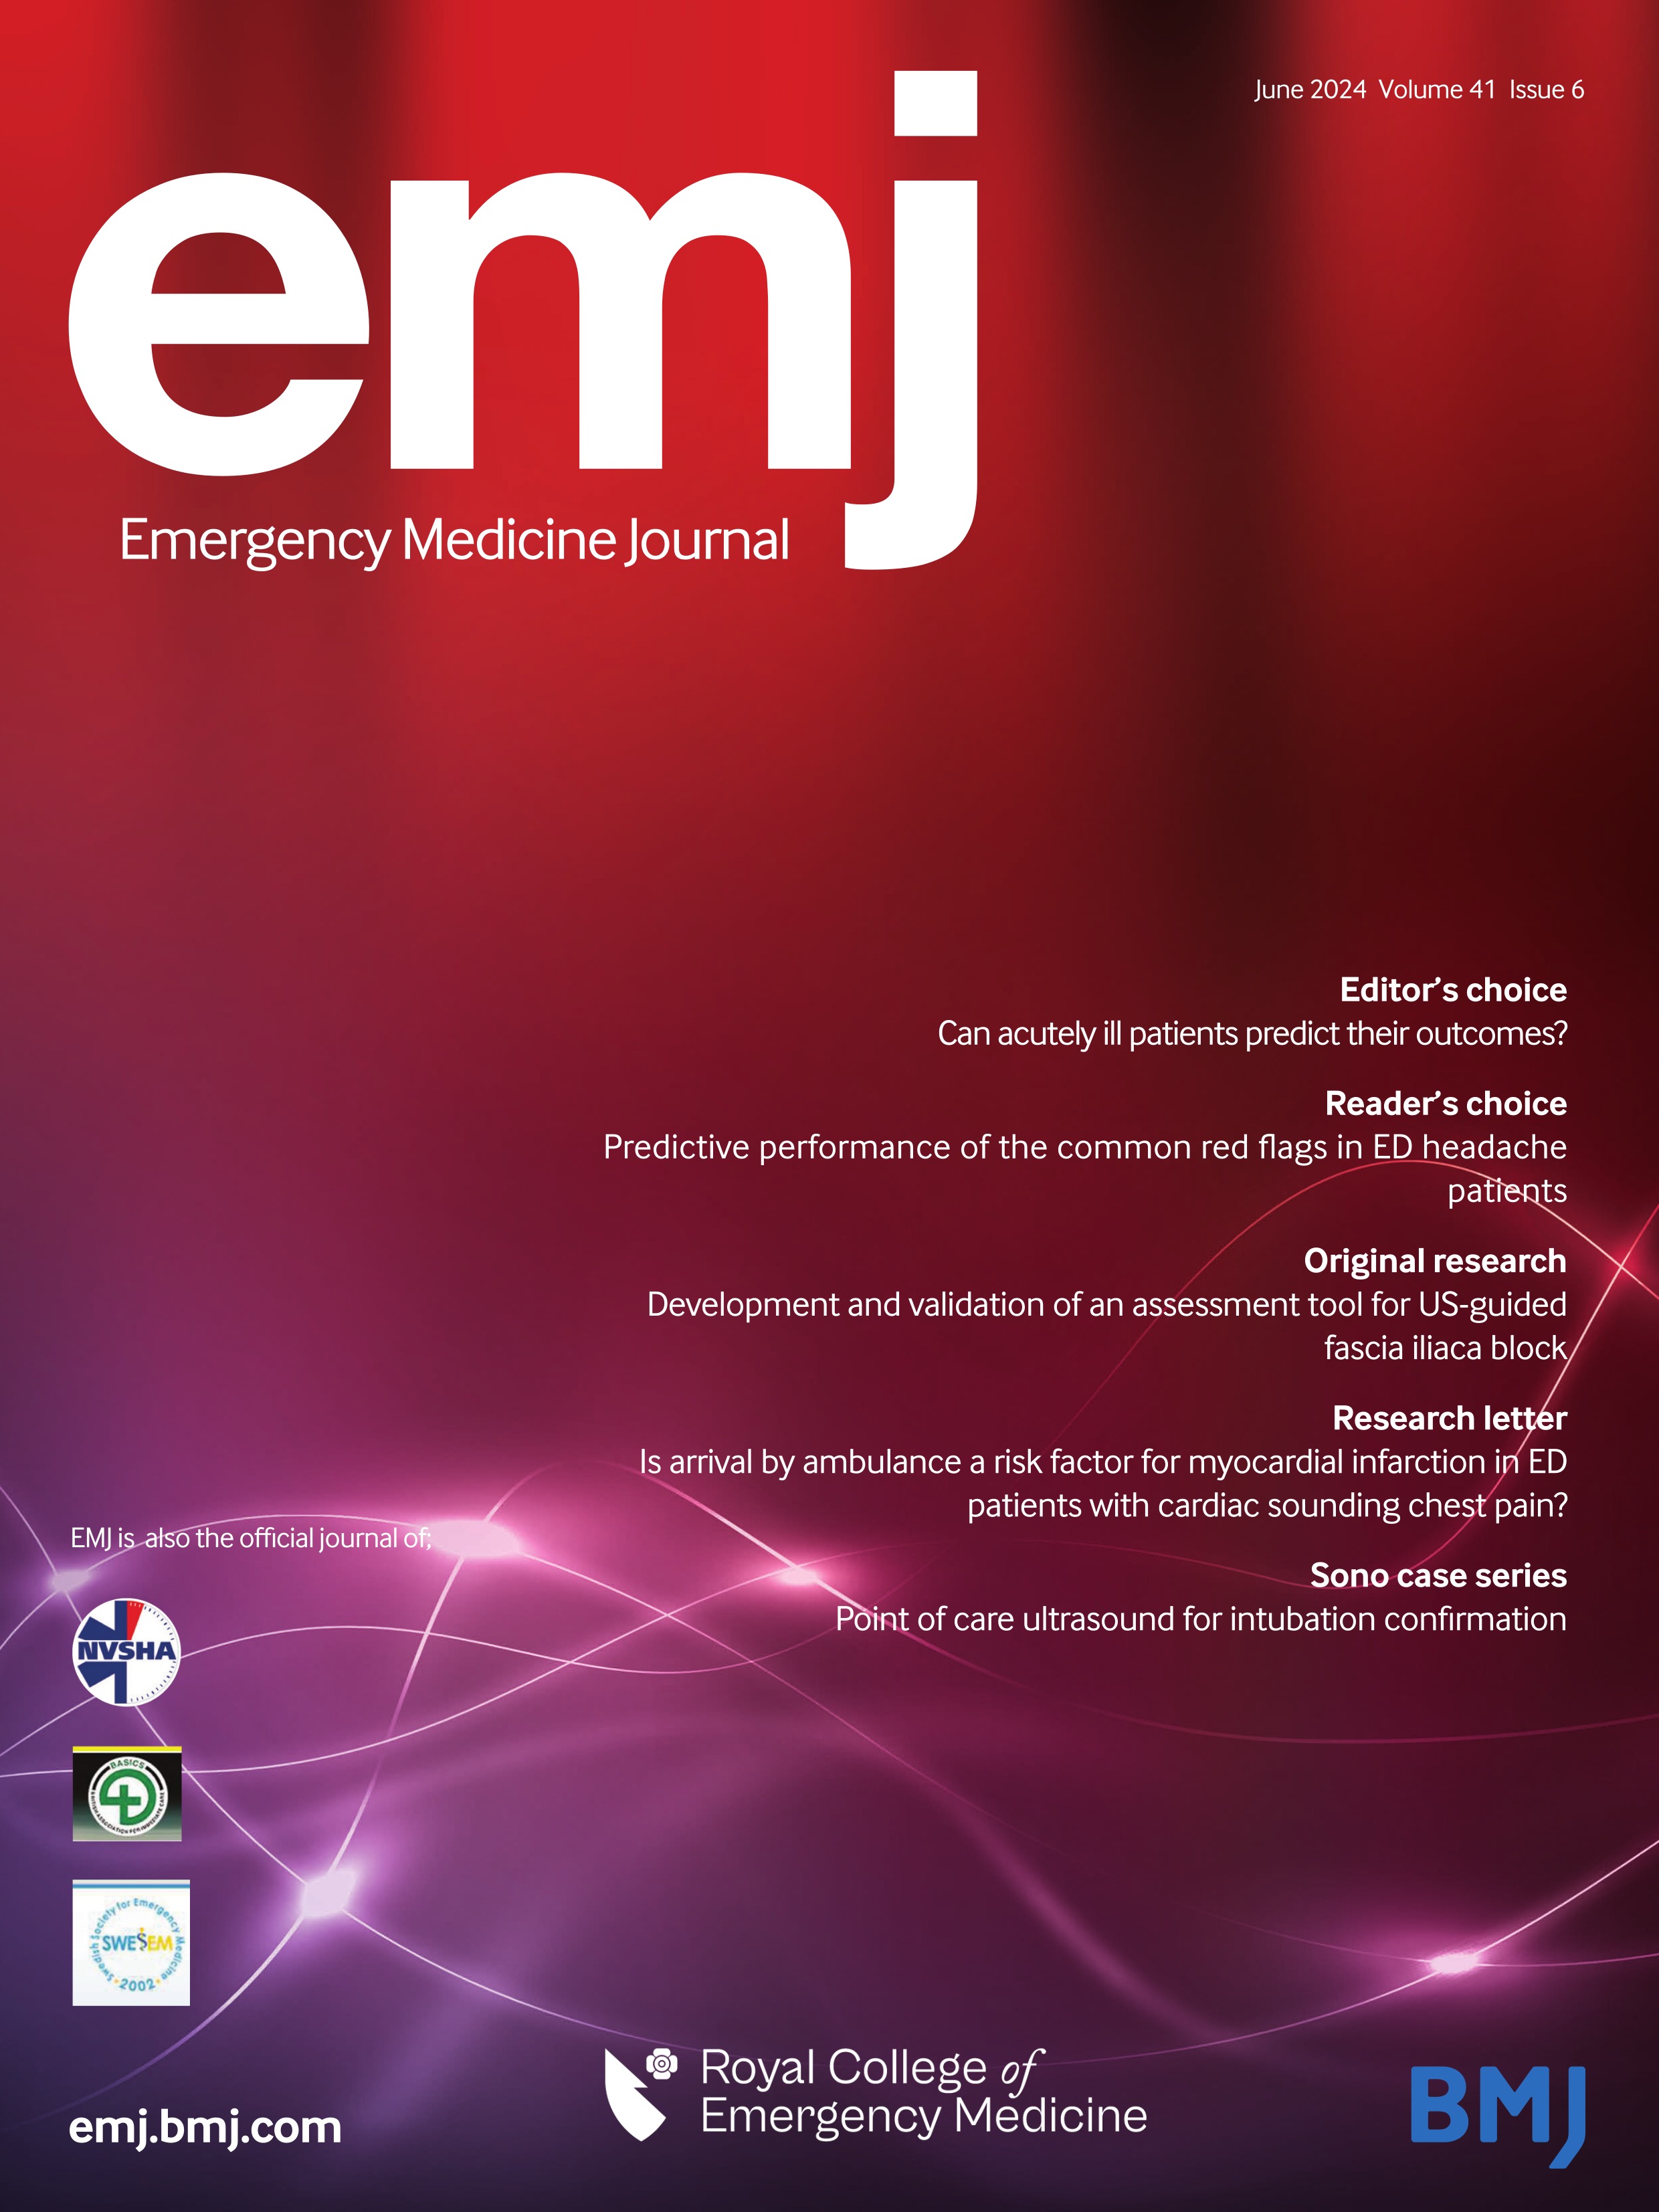 Pain in the ED: does anyone manage it well?